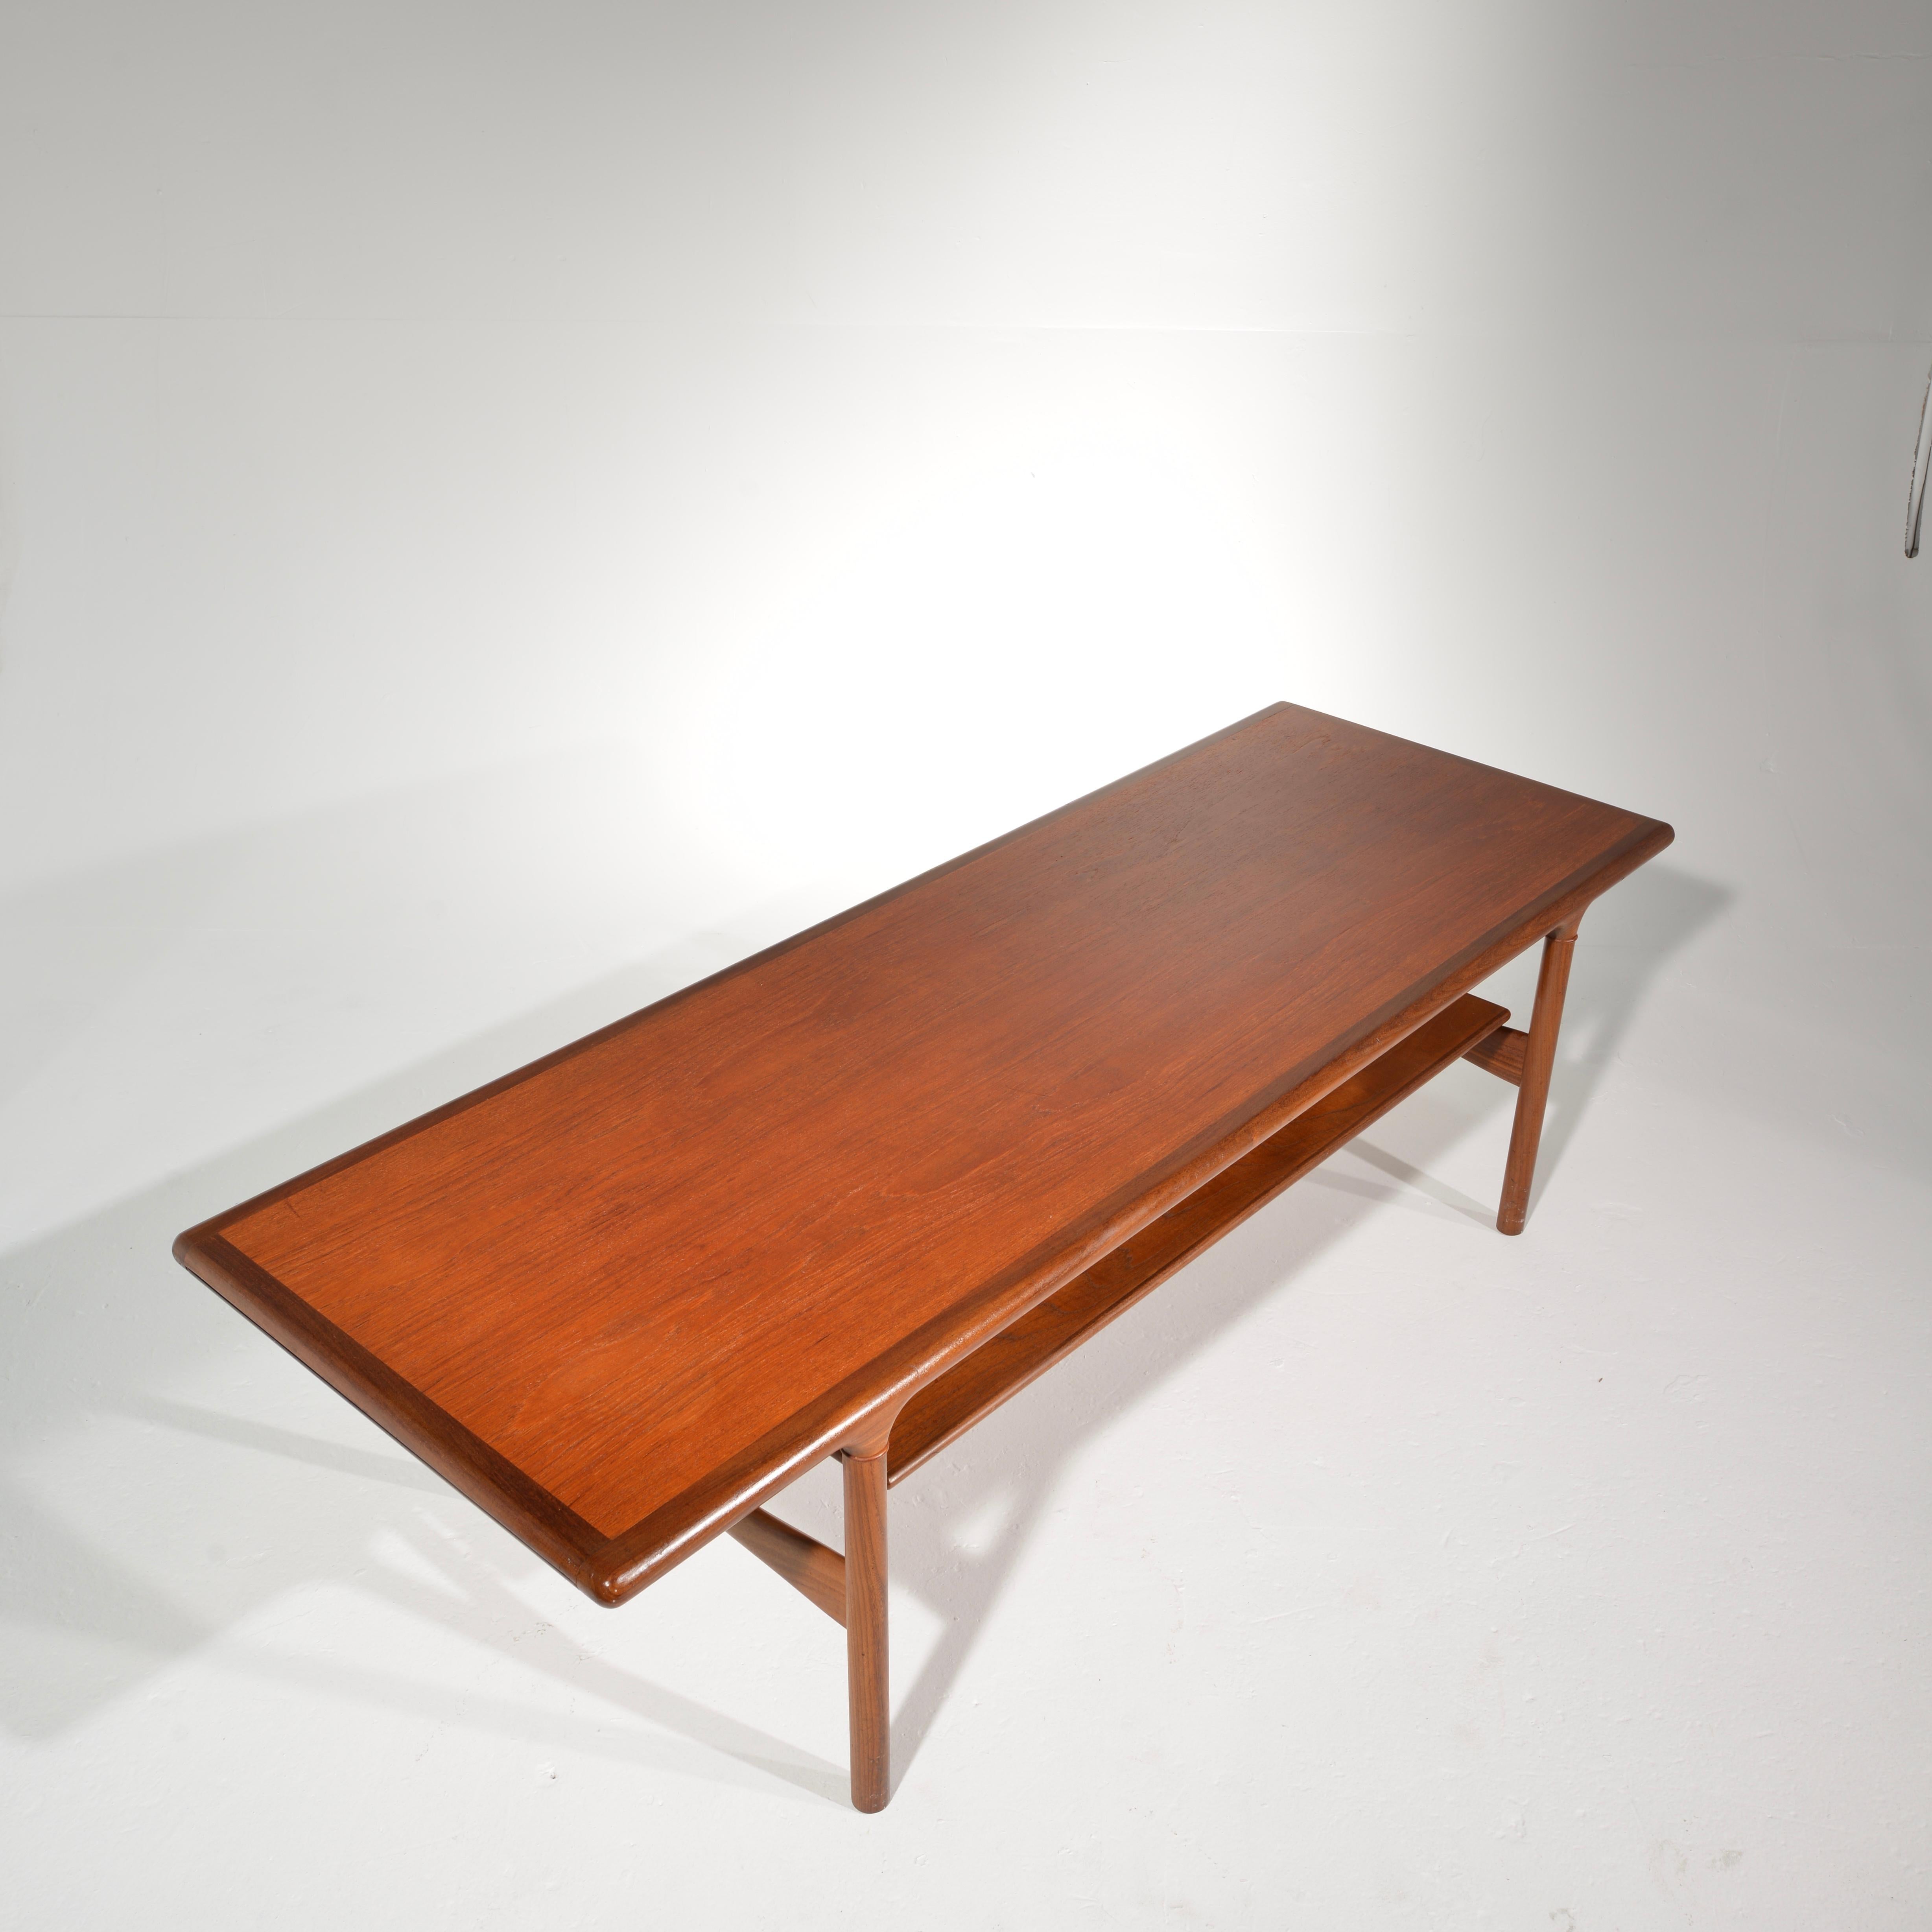 Rare Large Midcentury Extending Teak Coffee Table with Floating Shelf For Sale 1